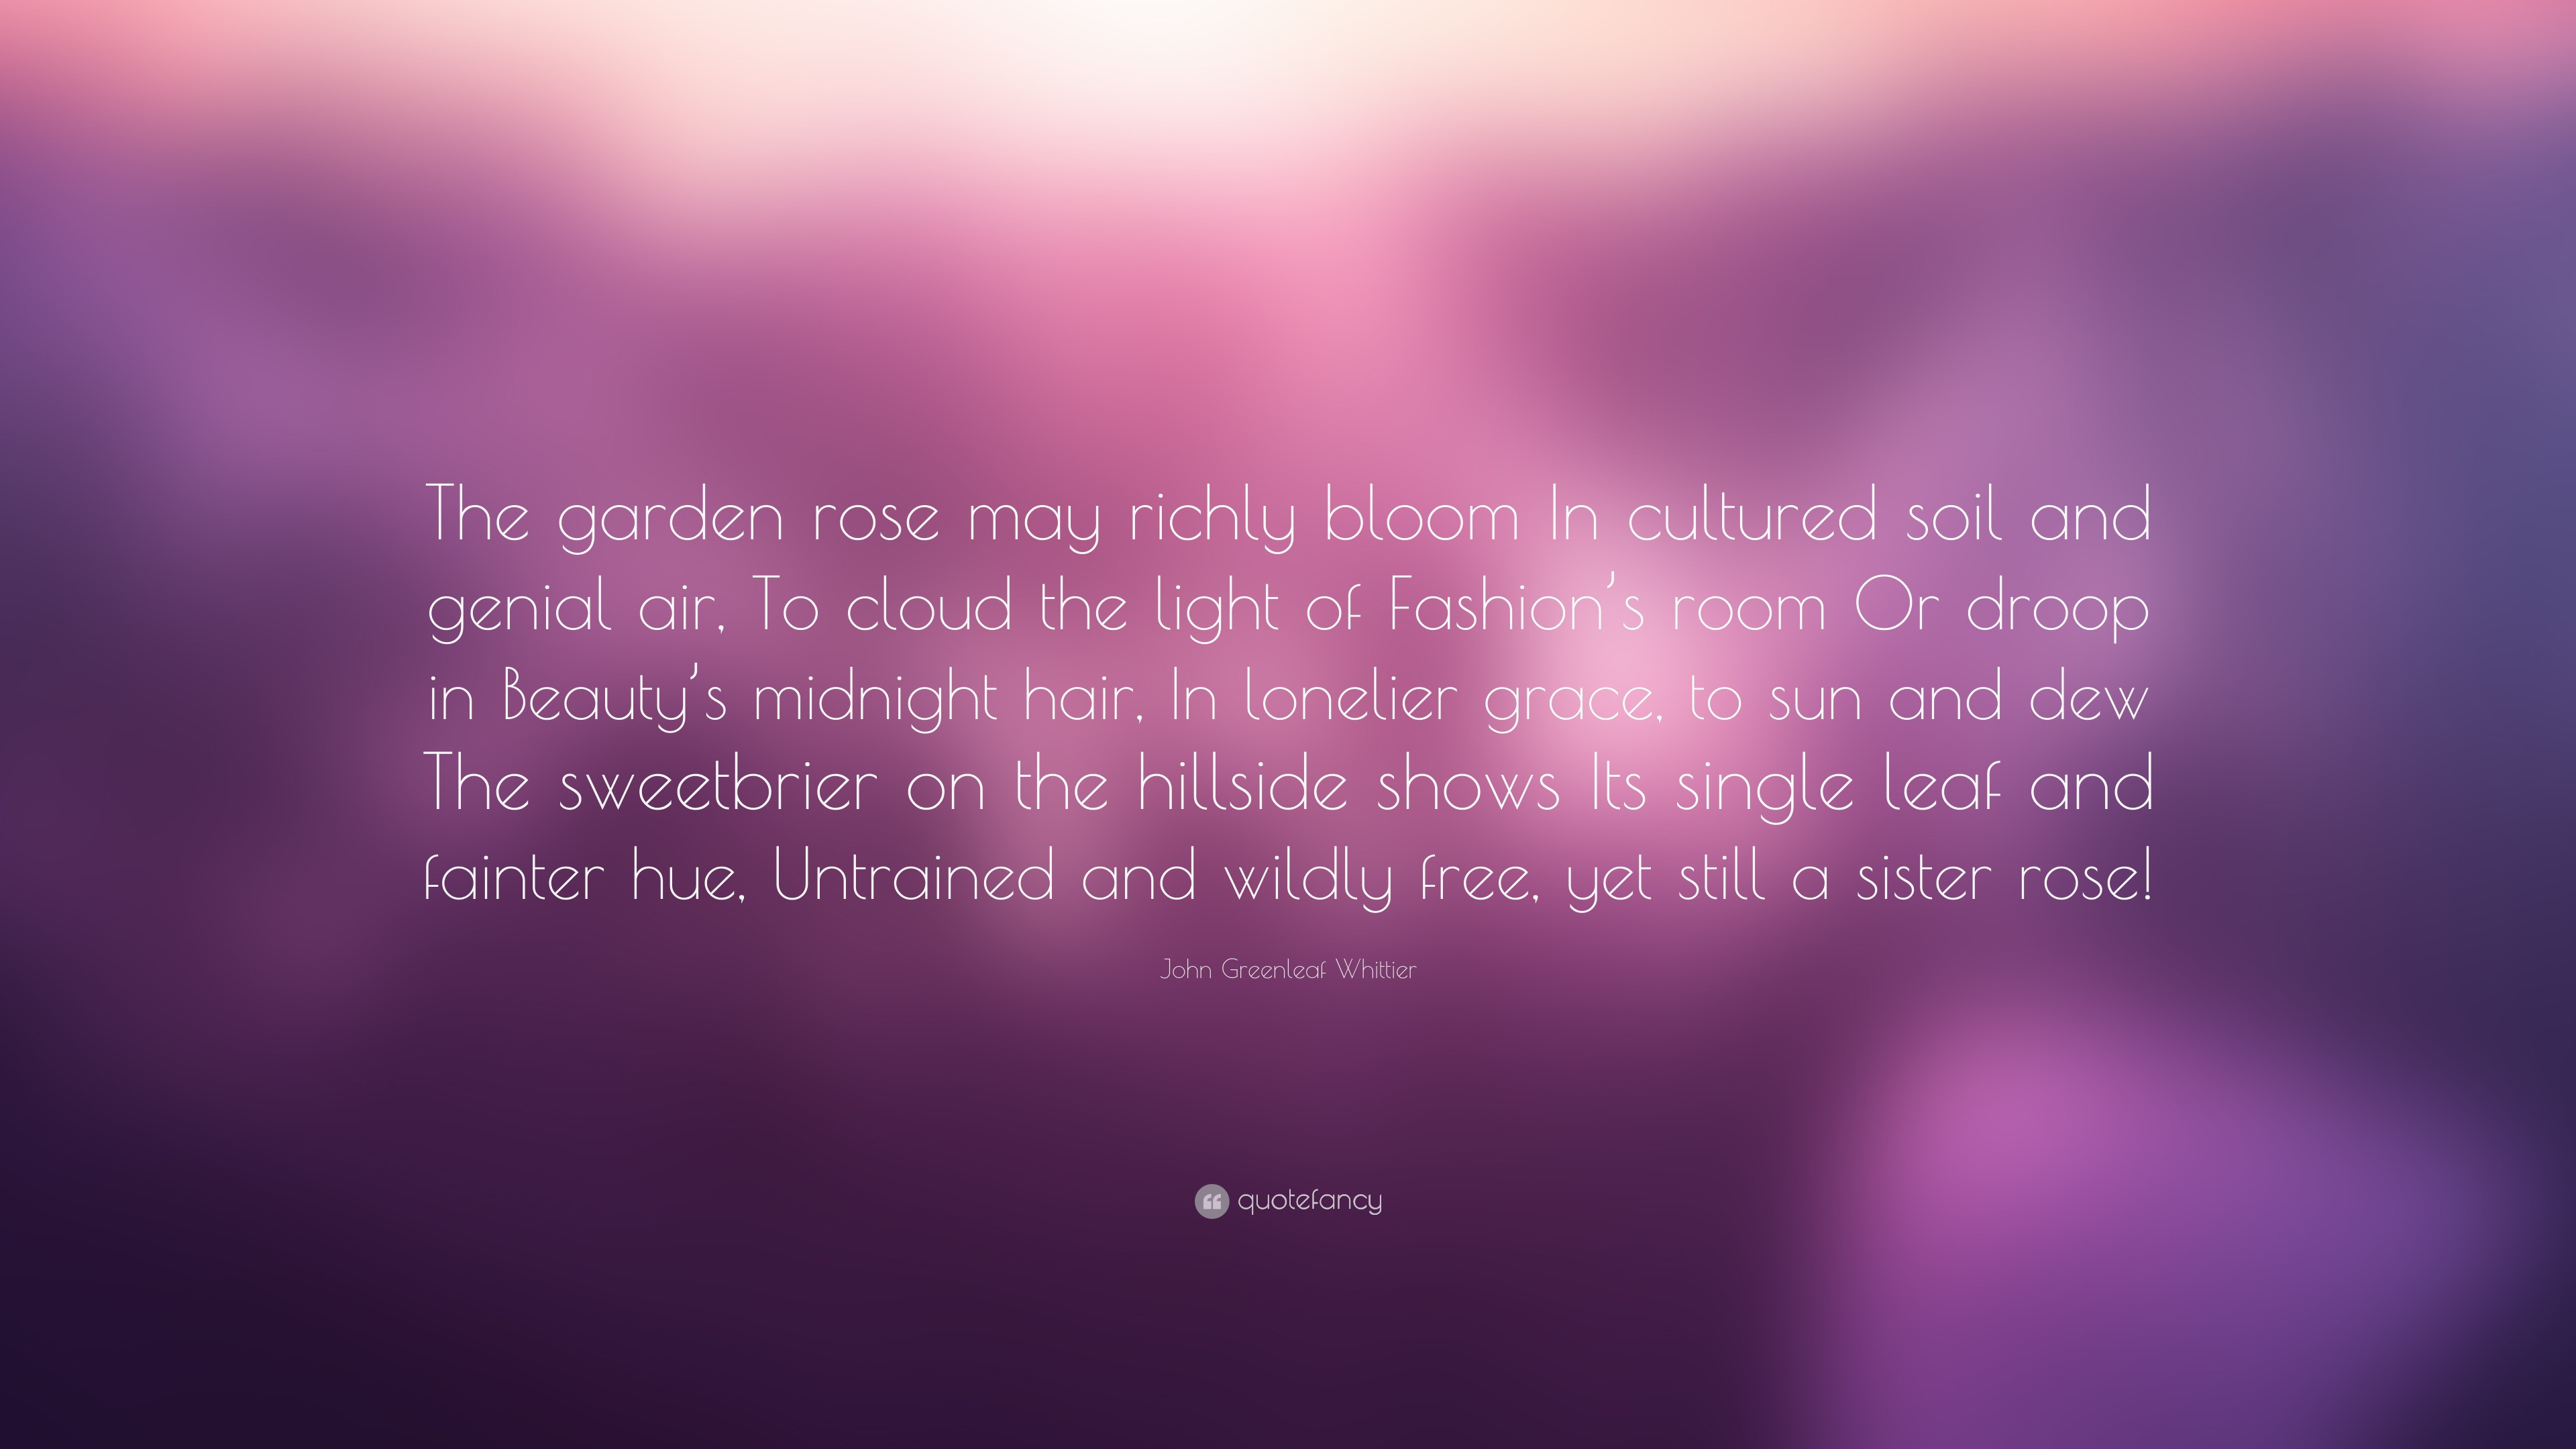 John Greenleaf Whittier Quote: “The garden rose may richly bloom In  cultured soil and genial air